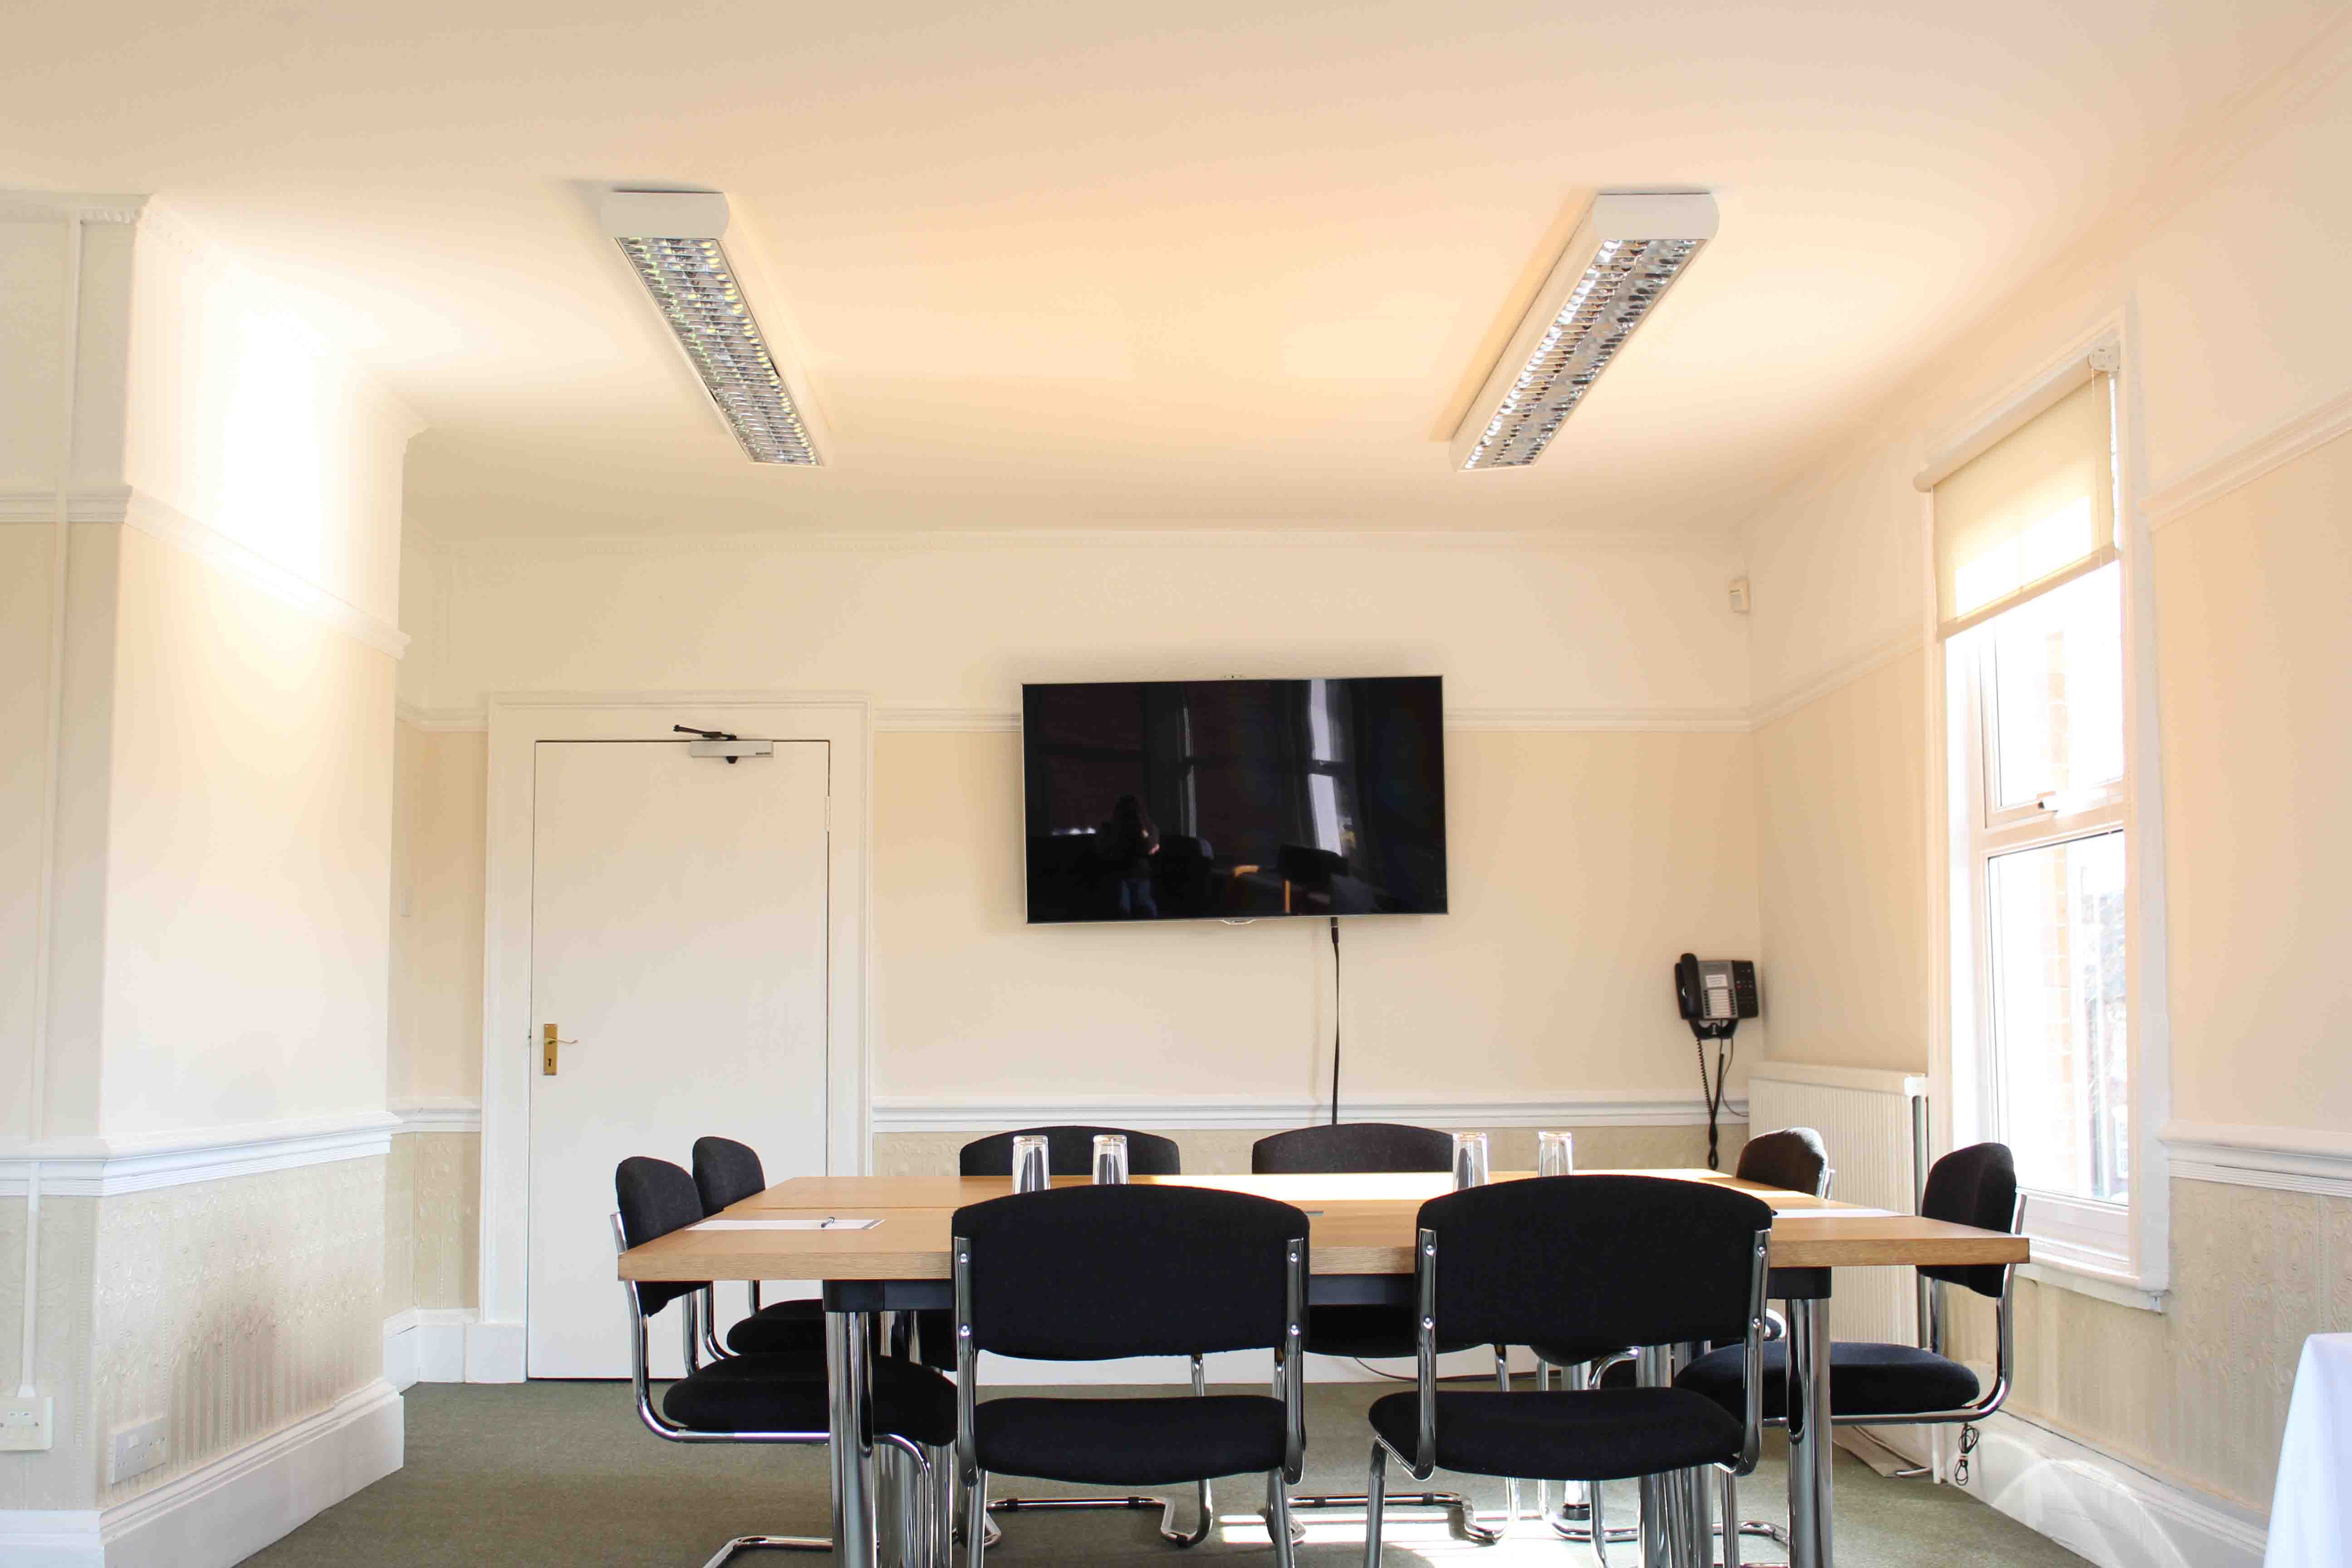 Butterton Meeting Room Heath House Conference Centre, Uttoxeter Staffordshire